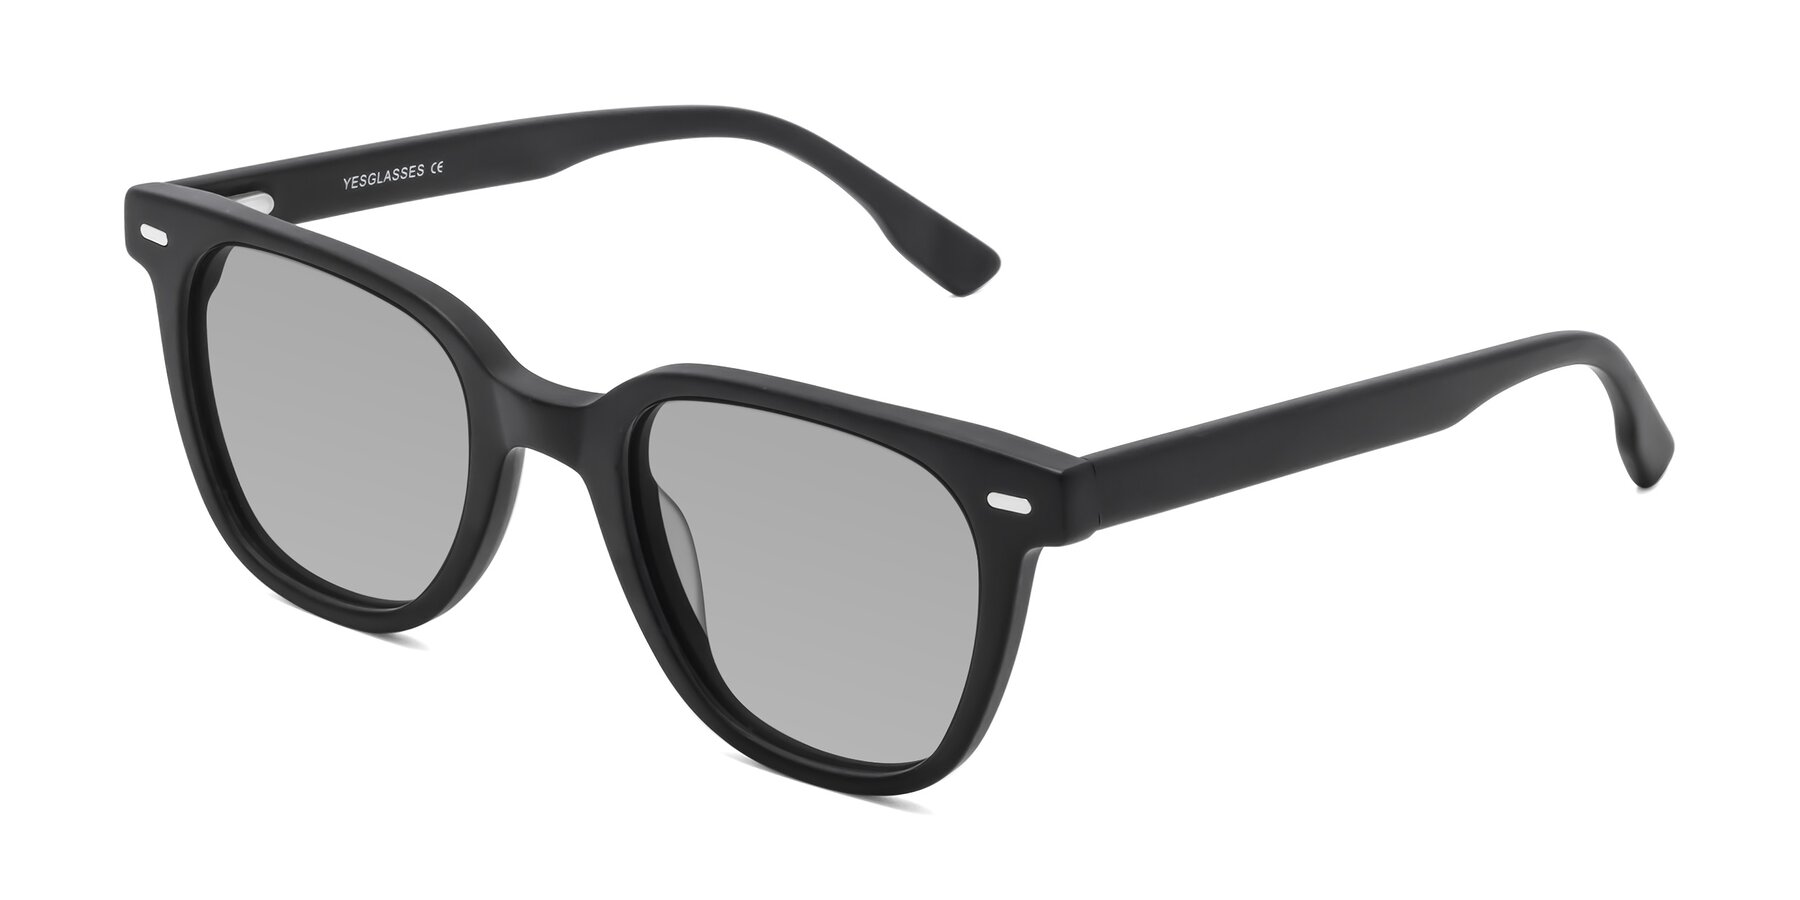 Angle of Beacon in Matte Black with Light Gray Tinted Lenses